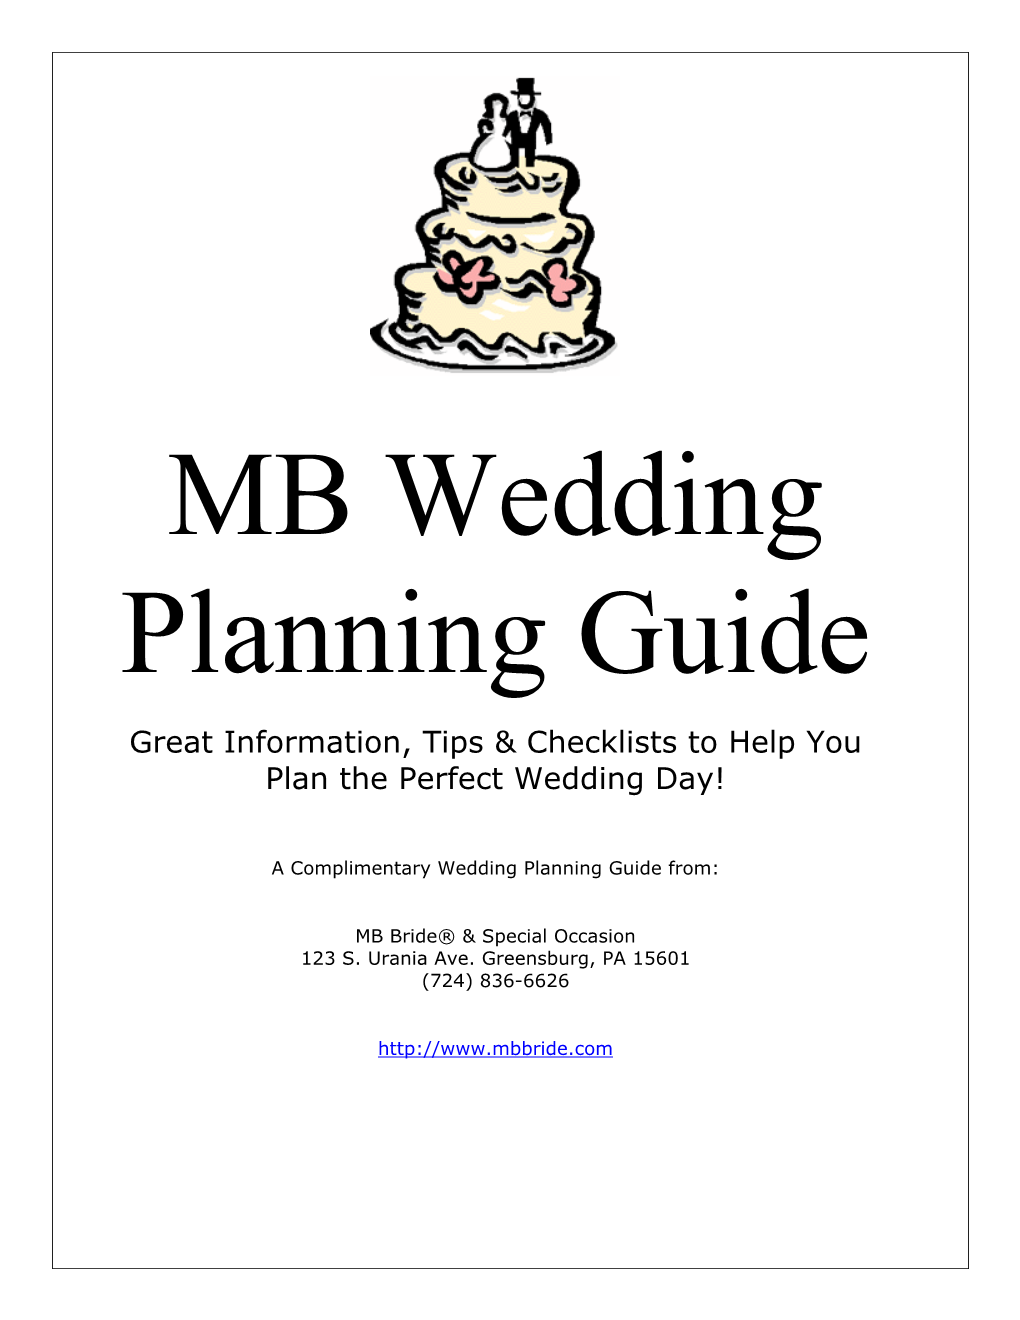 Great Information, Tips & Checklists to Help You Plan the Perfect Wedding